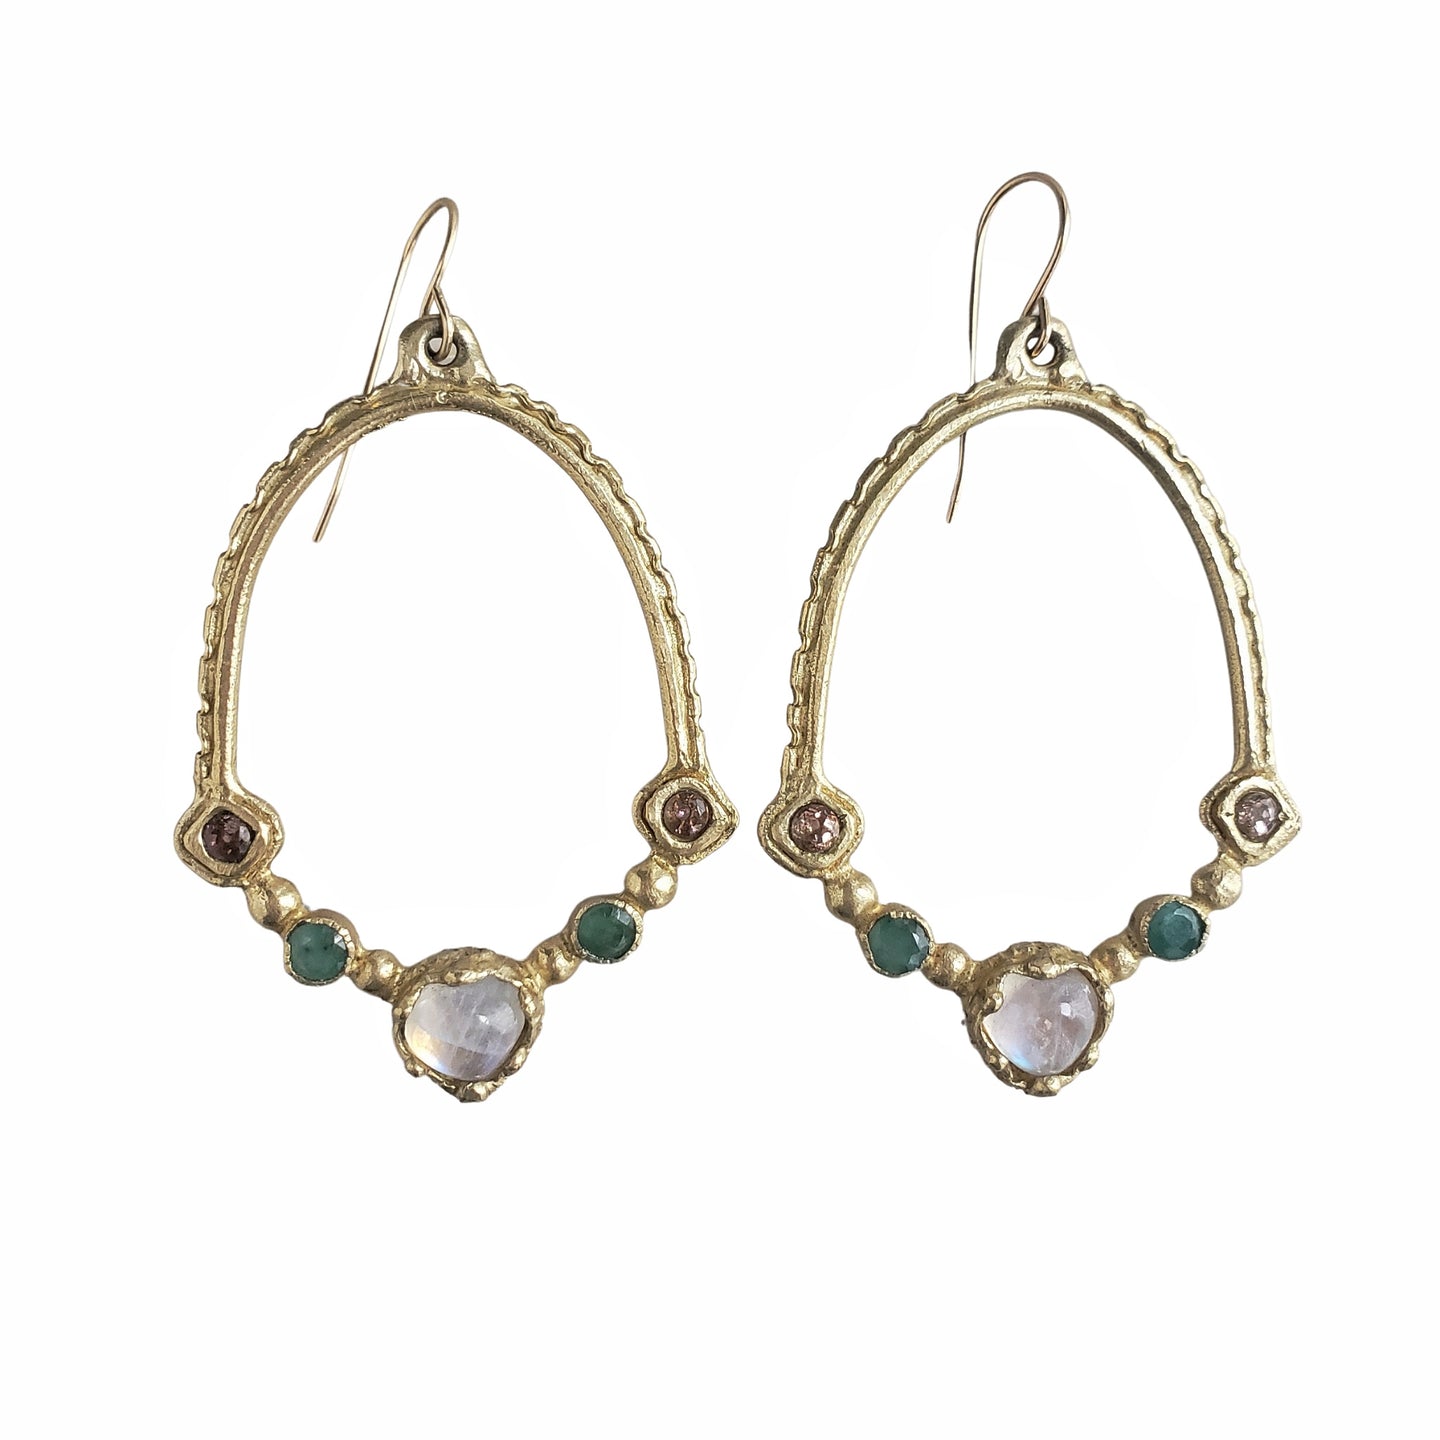 Earrings in Bronze, Moonstone, Emerald and Tourmaline